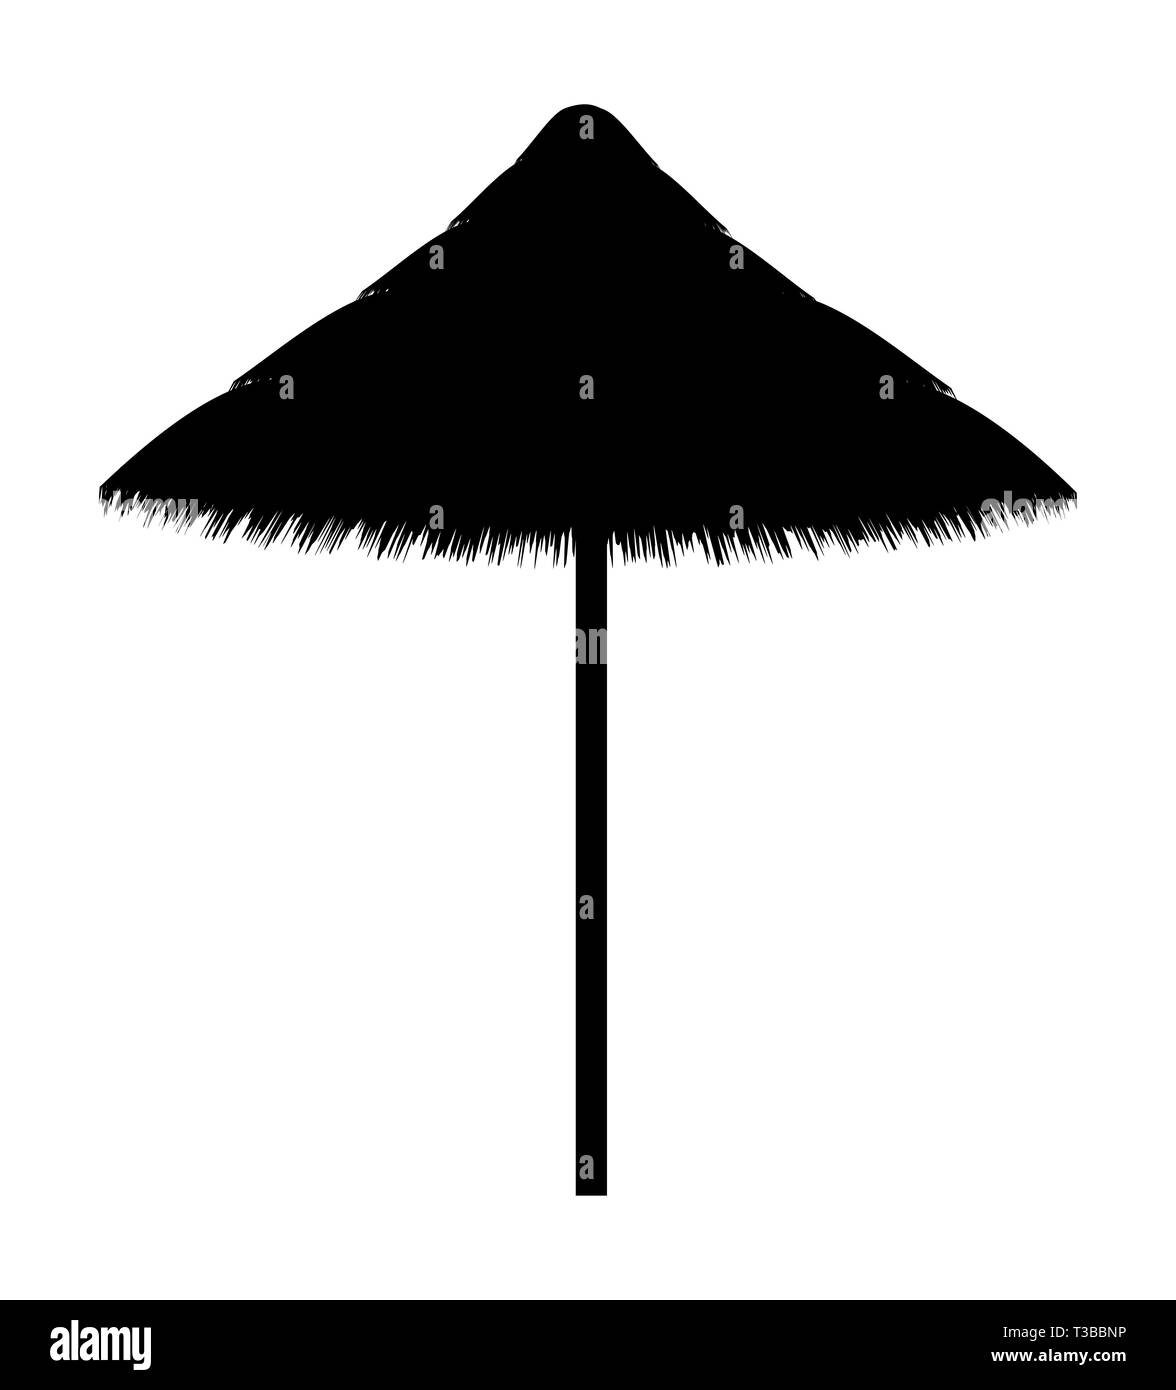 beach umbrella made for shade black contour silhouette vector illustration isolated on white background Stock Photo